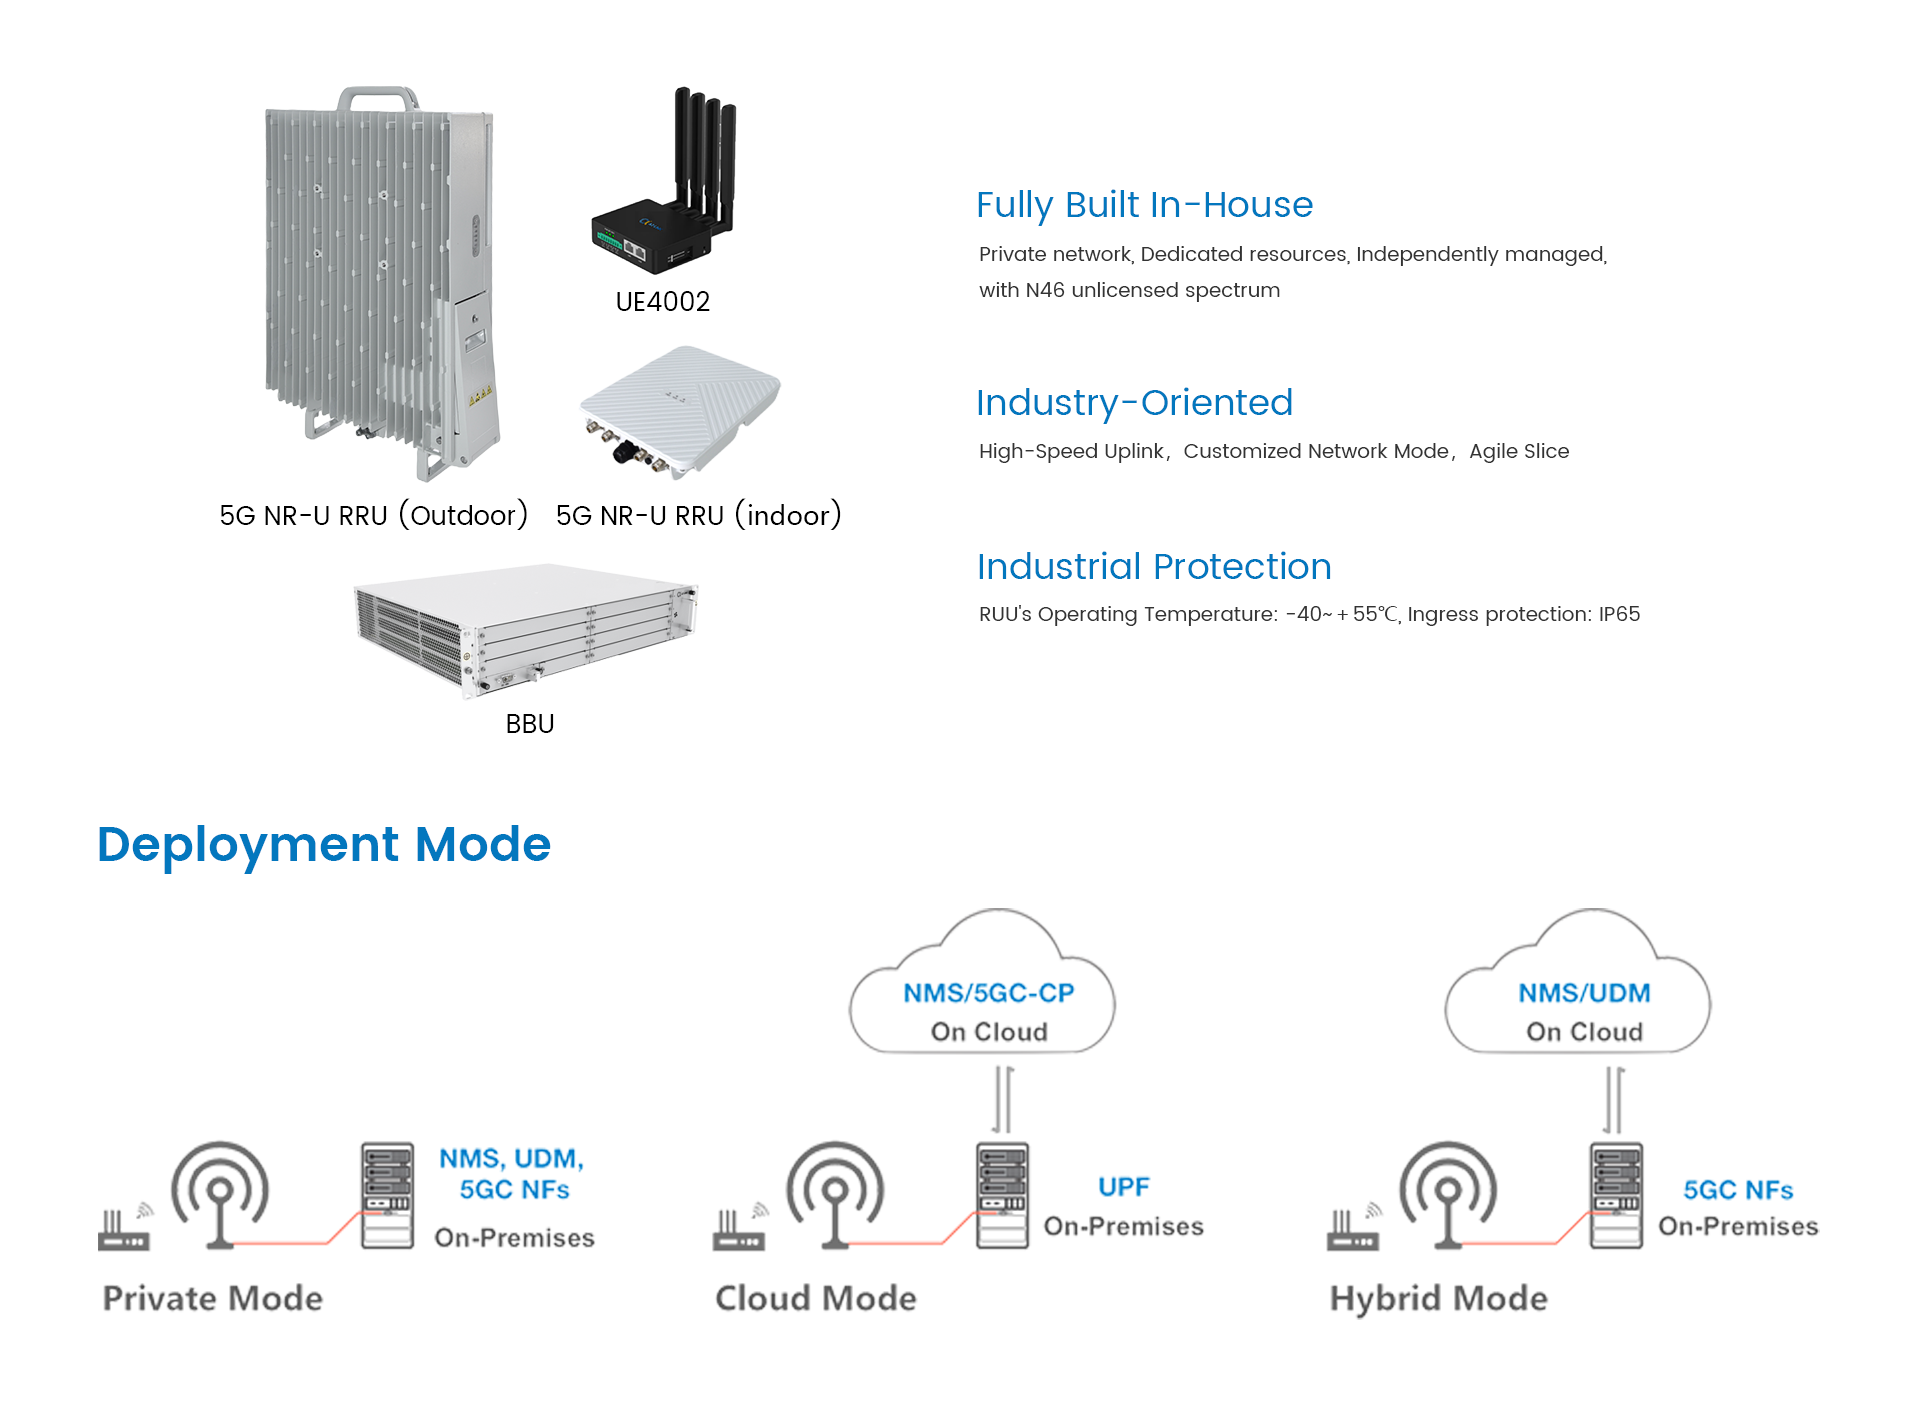 AI-LINK Debuts the World's First Cloud Native Industrial 5G NR-U